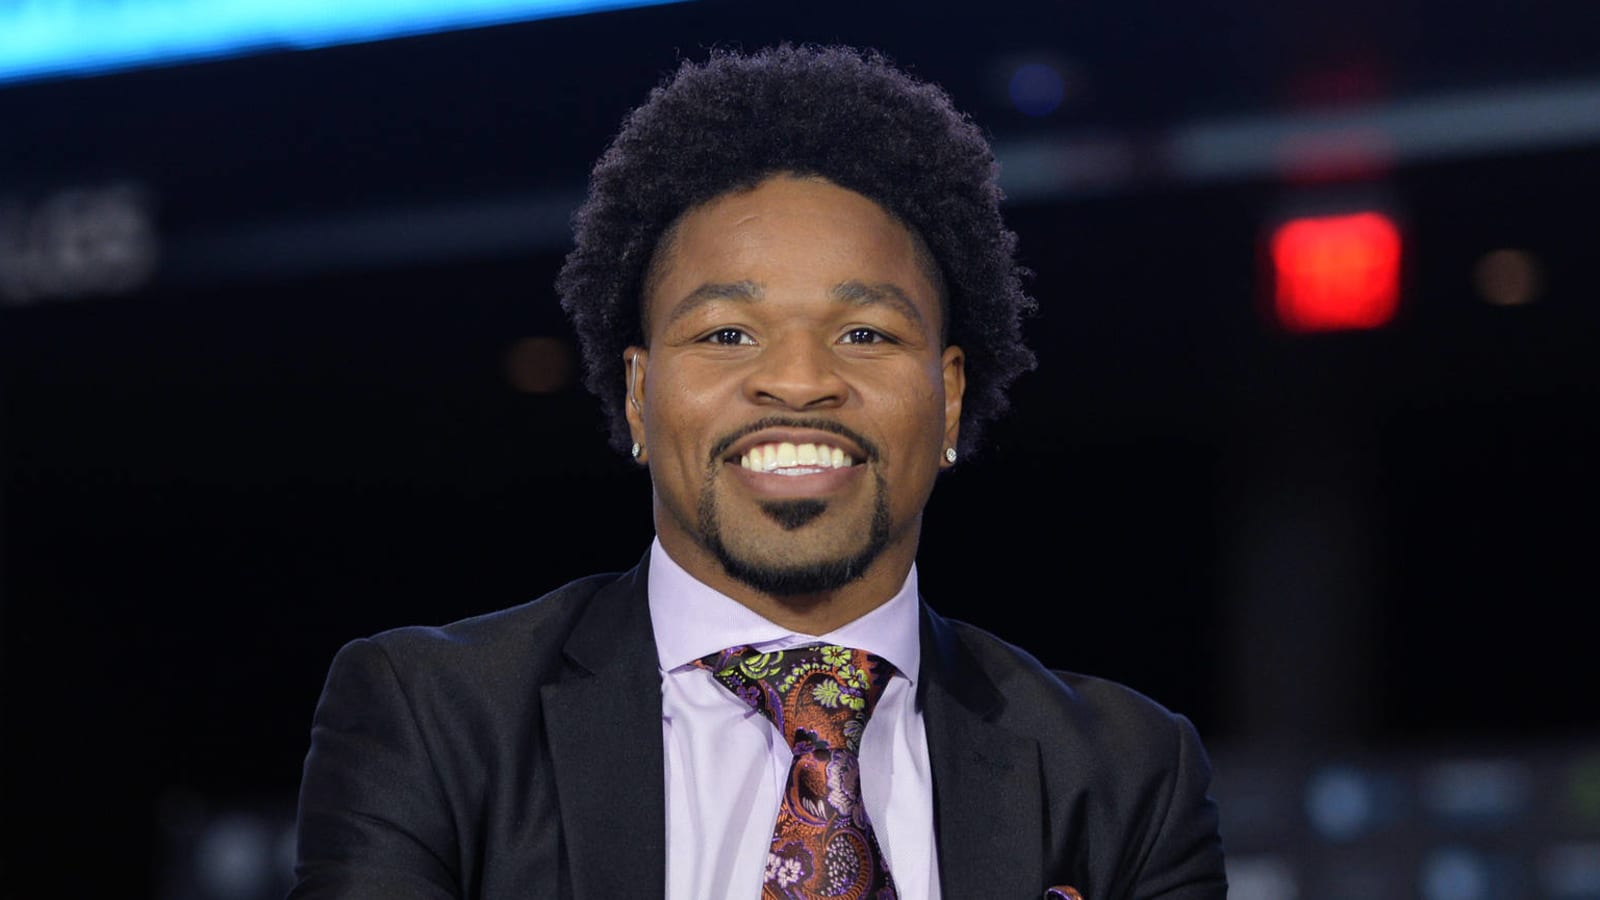 Shawn Porter announces retirement after loss to Terence Crawford